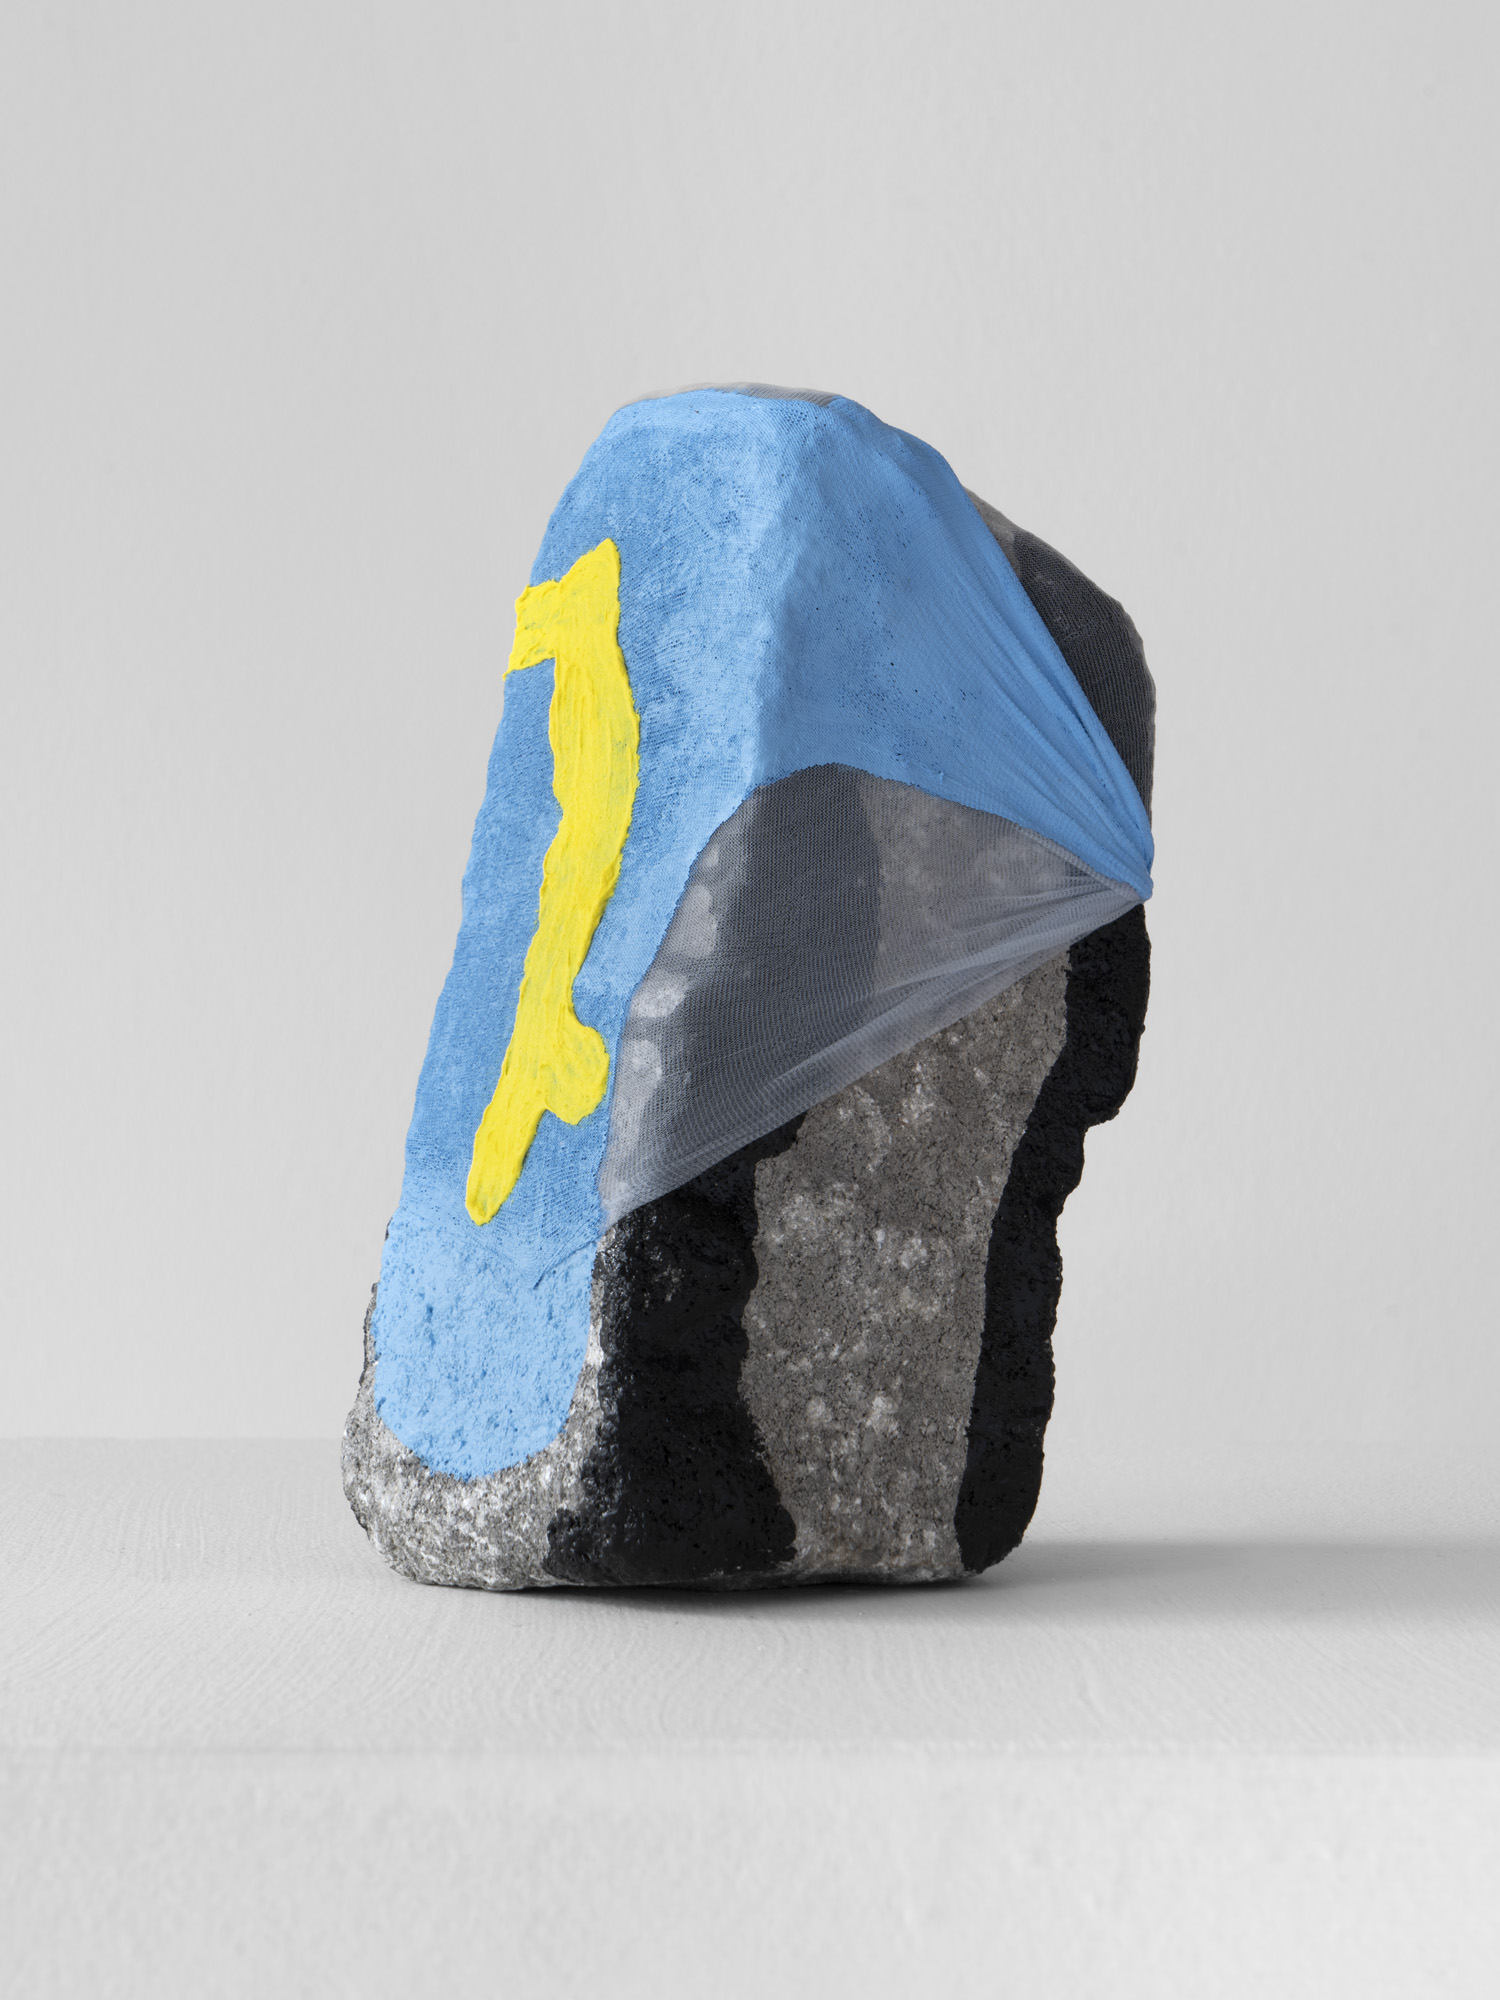 A sculpture in the form of a rock. Painted gray with black vertical stripes and covered in nylon painted blue and yellow.